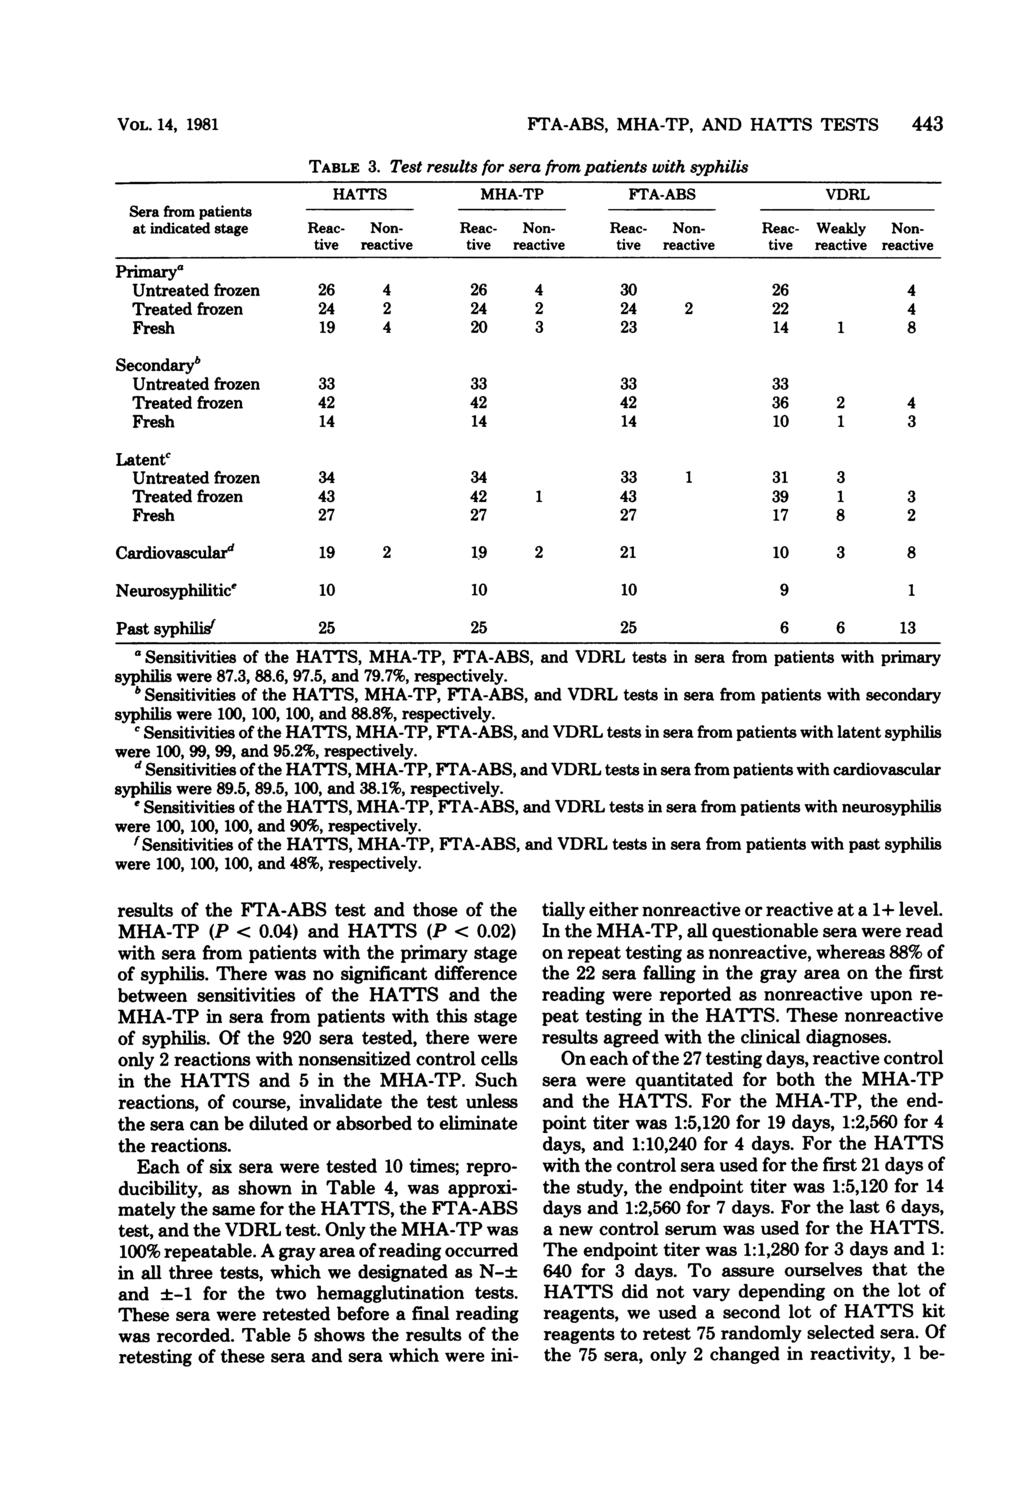 VOL. 14, 1981 FTA-ABS, MHA-TP, AND HATTS TESTS 443 TABLE 3.